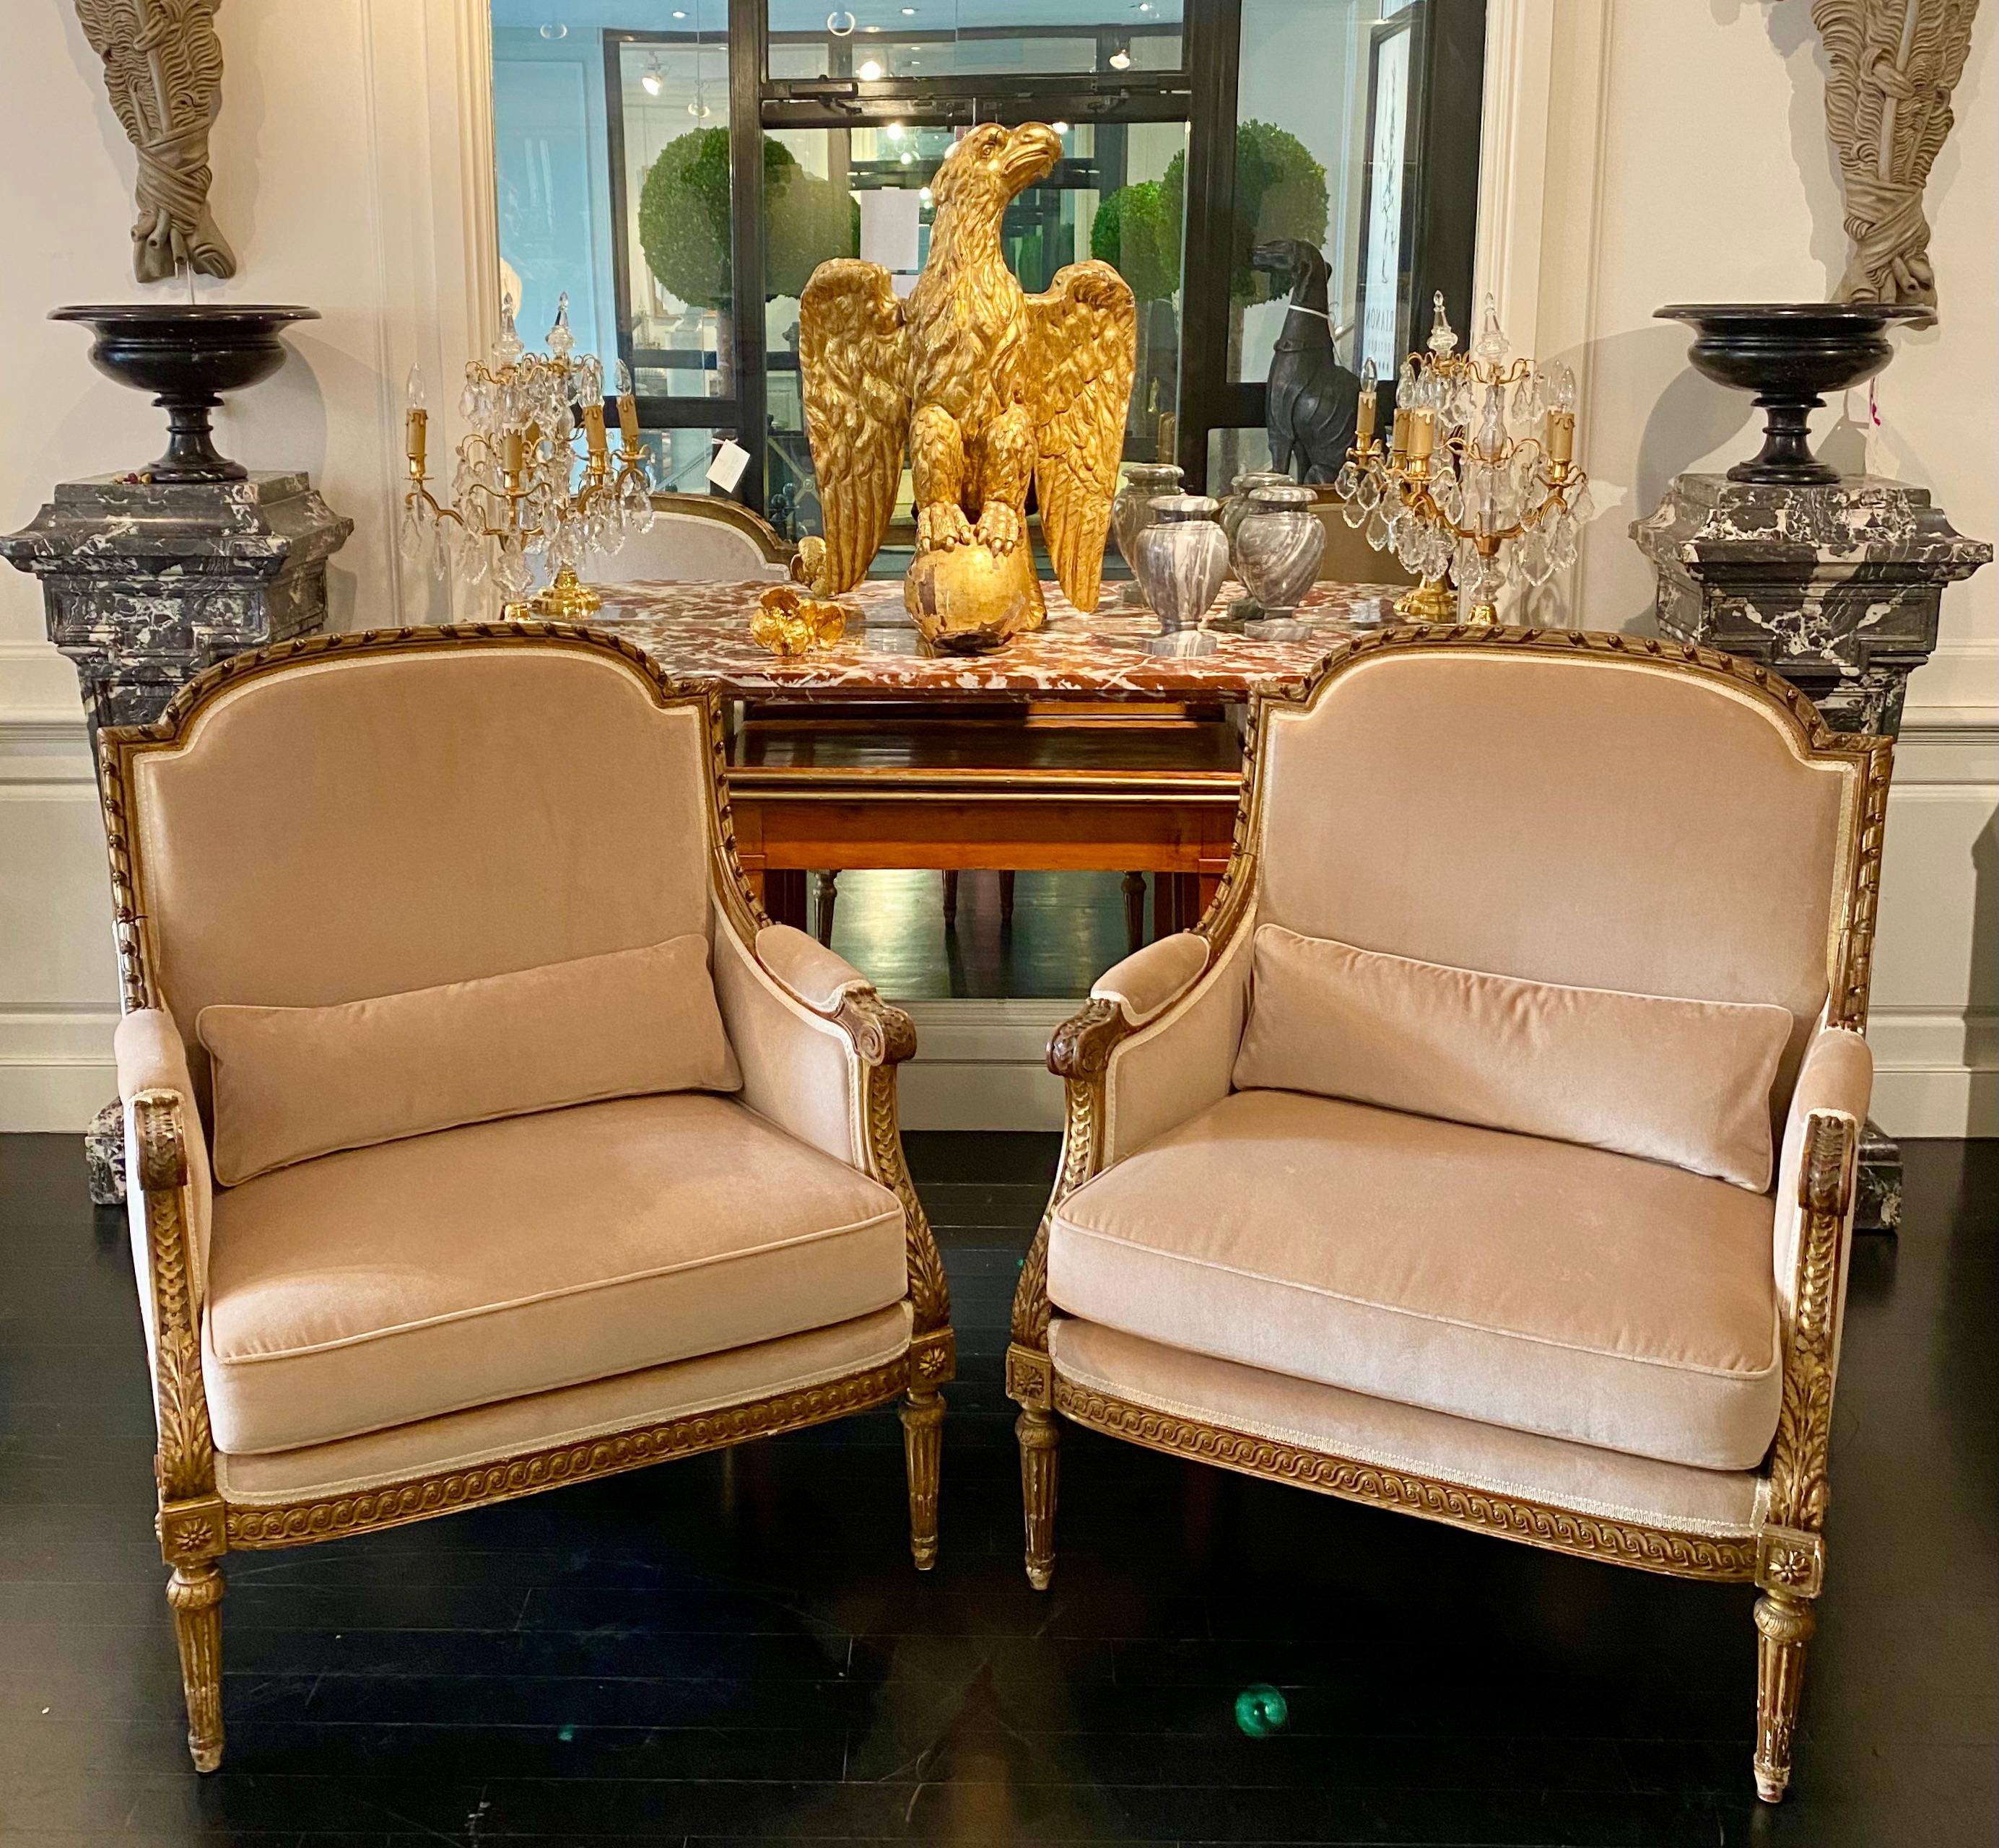 French pair of Louis XVI style marquise bergère armchairs, gilt wood, 19th century.
In the clean and classic Louis XVI style, the name Marquise is attributed due to their exceptional width. This rare gilt pair is in very good condition considering